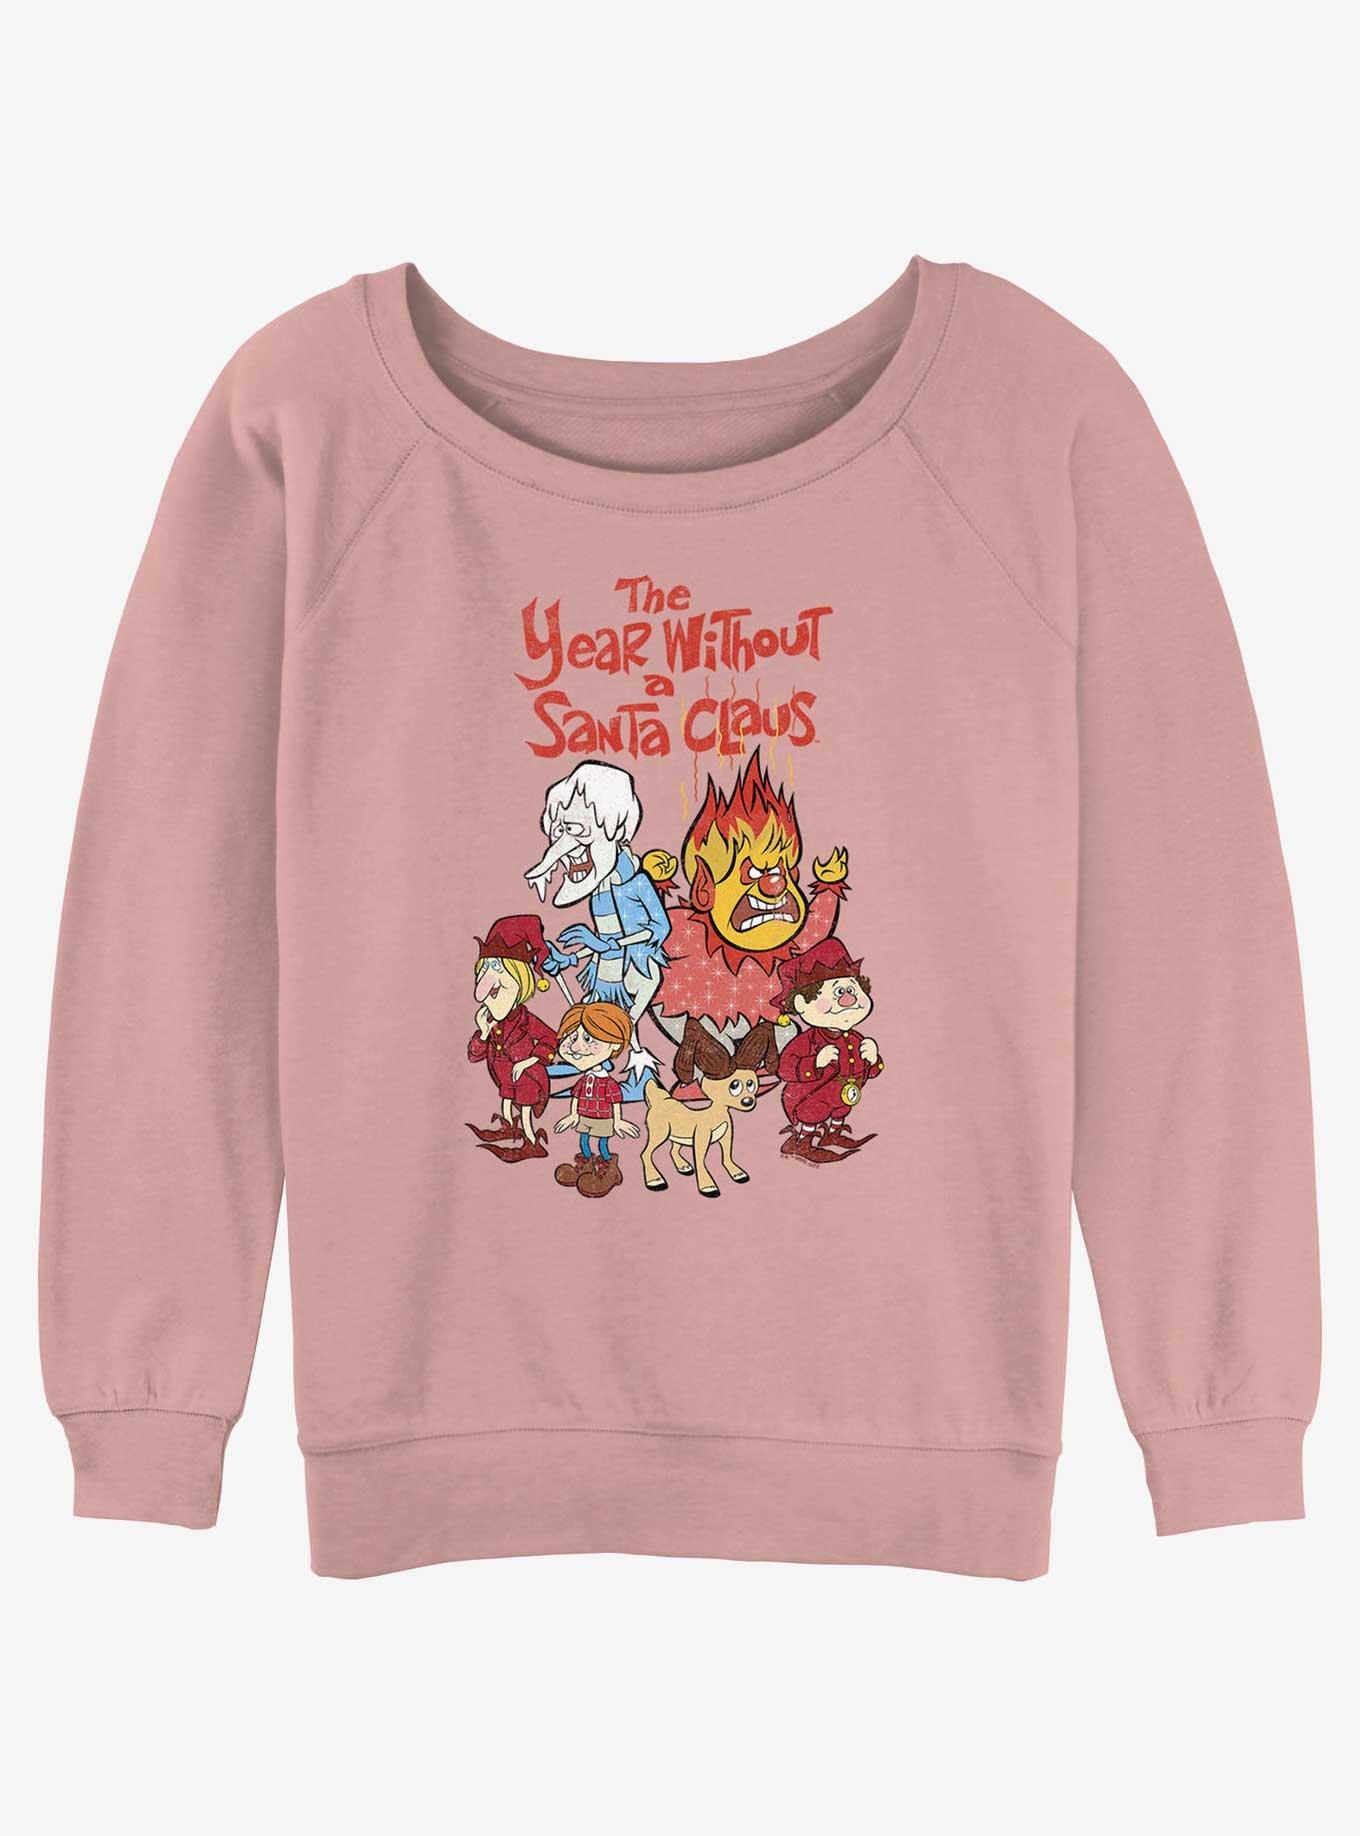 The Year Without a Santa Claus Logo Group Girls Slouchy Sweatshirt